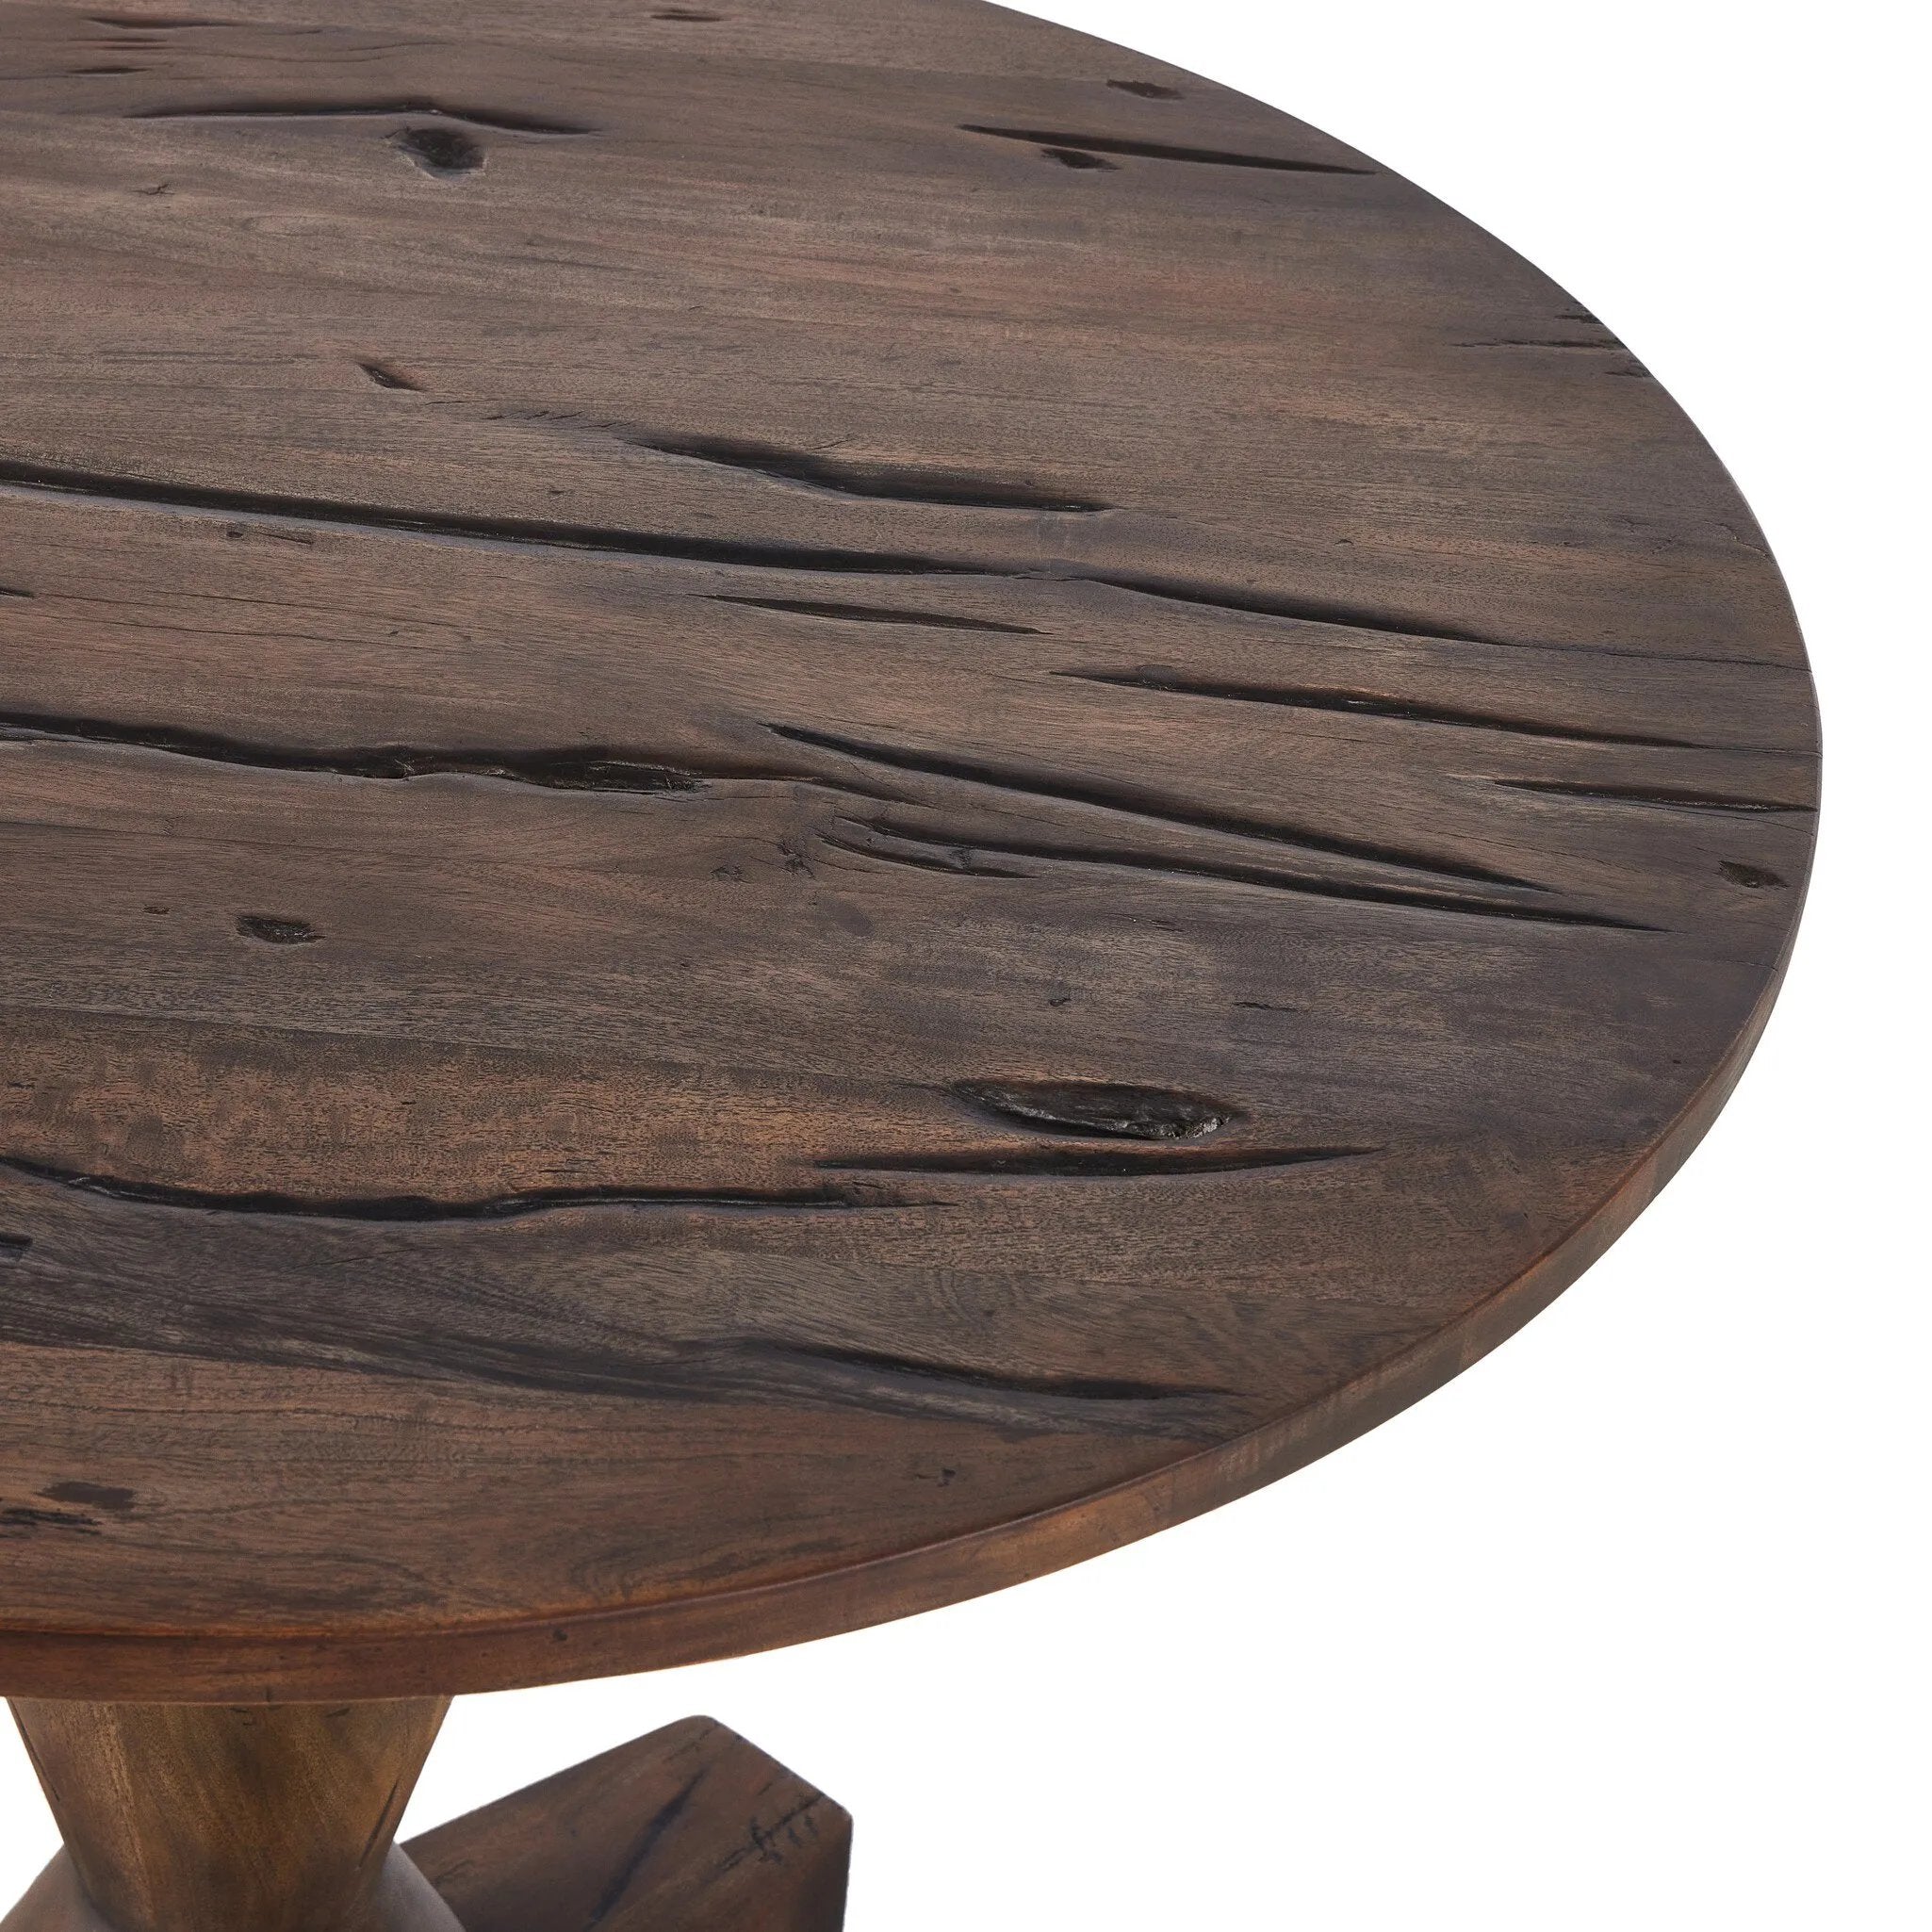 Inspired by Romanian sculptor Constantin BrÃ¢ncu?i, a classic pedestal table of mixed character woods works a heritage look into the home.Collection: Theor Amethyst Home provides interior design, new home construction design consulting, vintage area rugs, and lighting in the Dallas metro area.